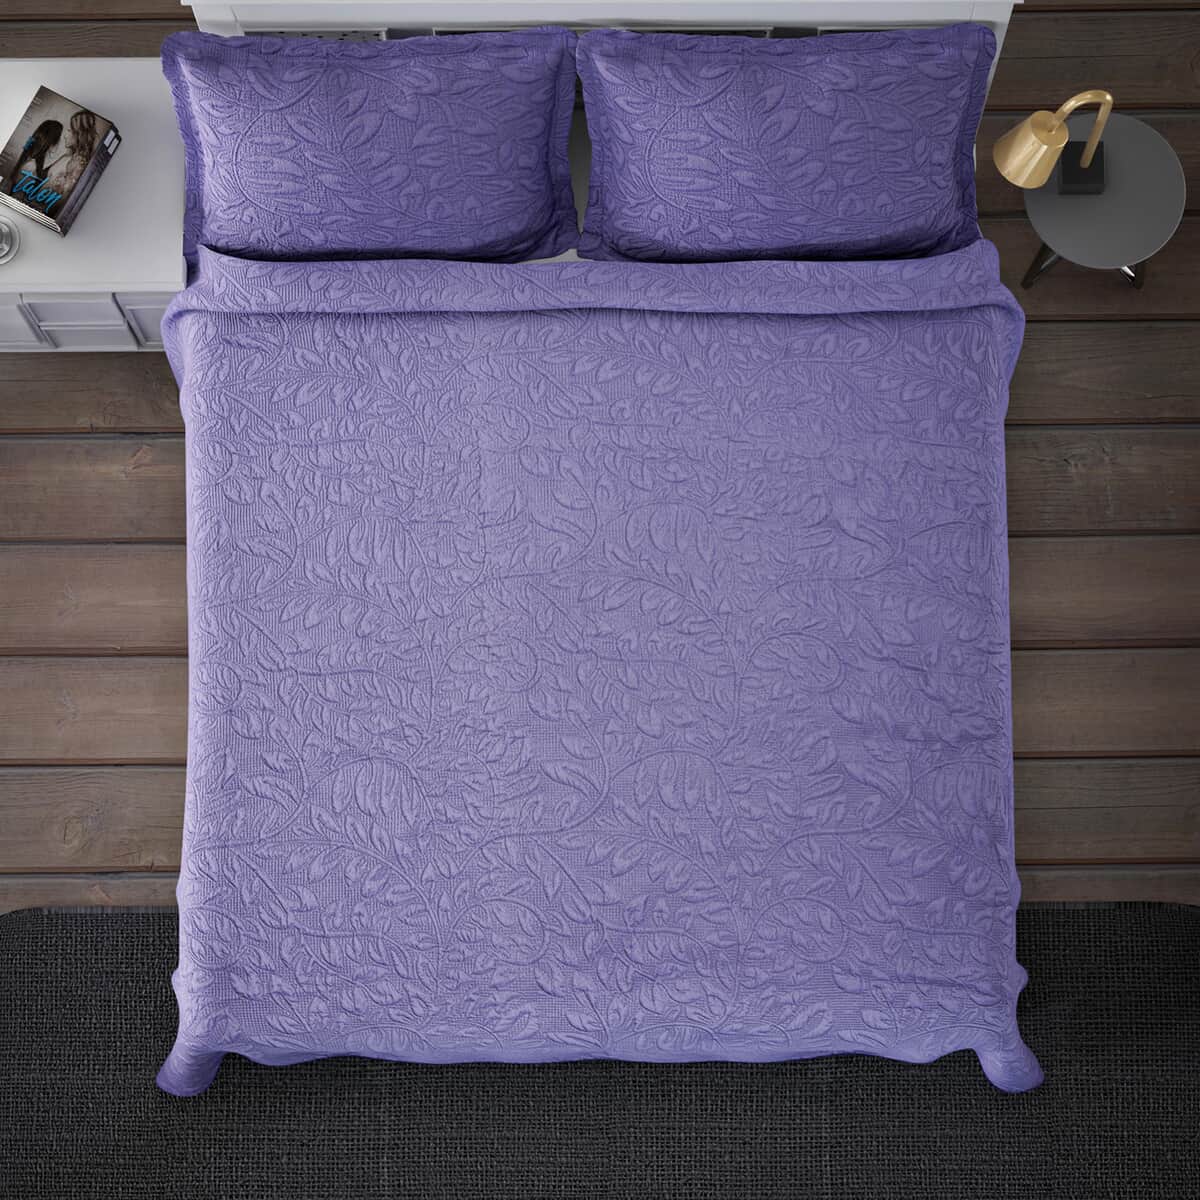 HOMESMART Lilac 3D Pinsonic Embossed Pattern Quilt with 2 Shams - Queen (Microfiber) image number 2